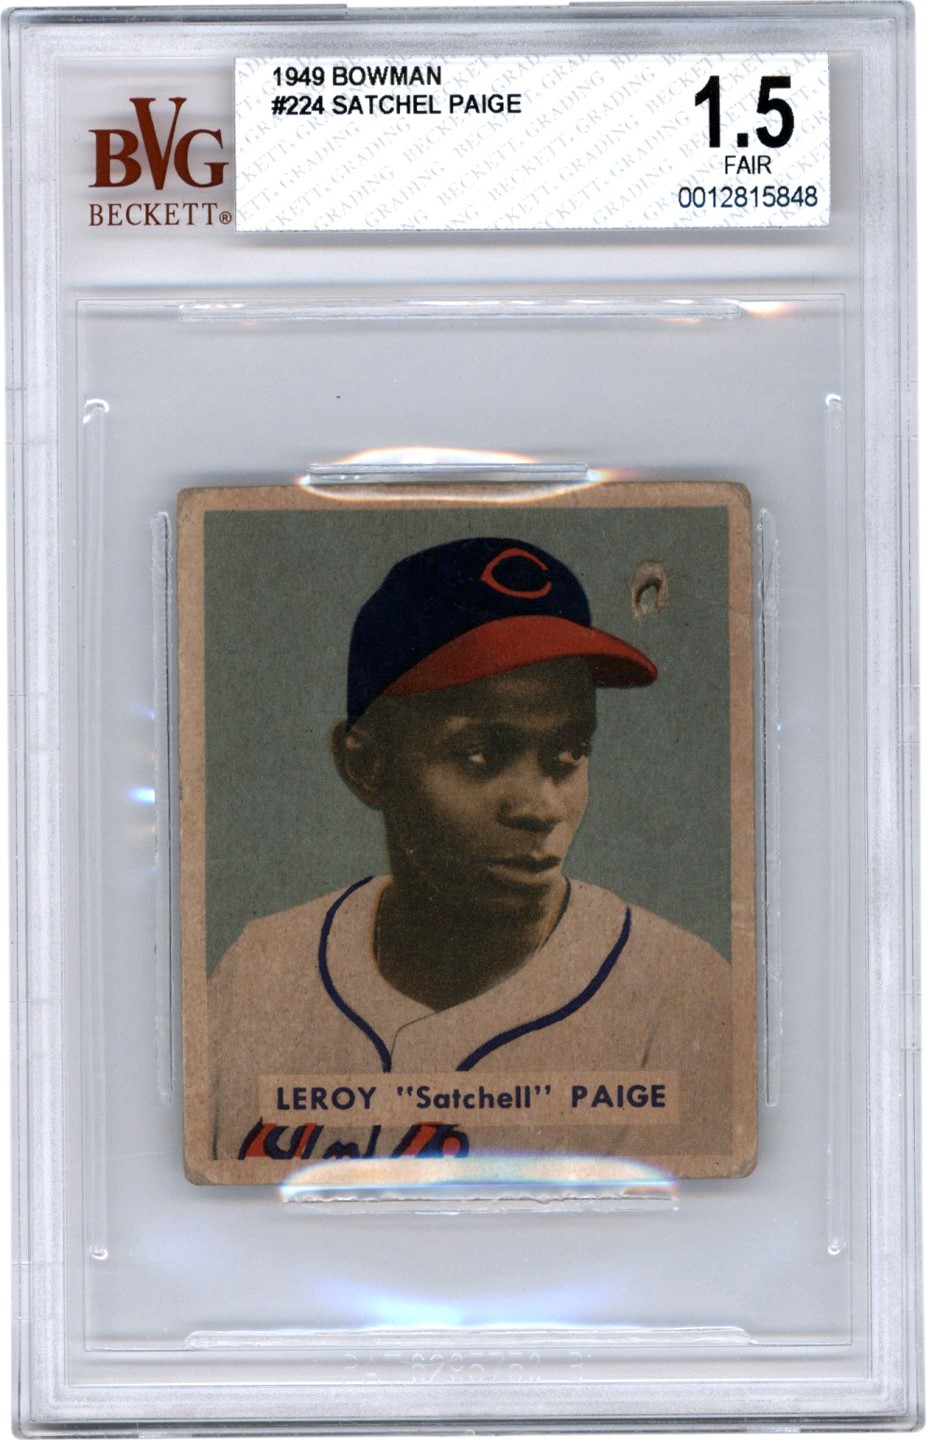 Baseball and Trading Cards - 1949 Bowman #224 Satchel Paige BVG 1.5